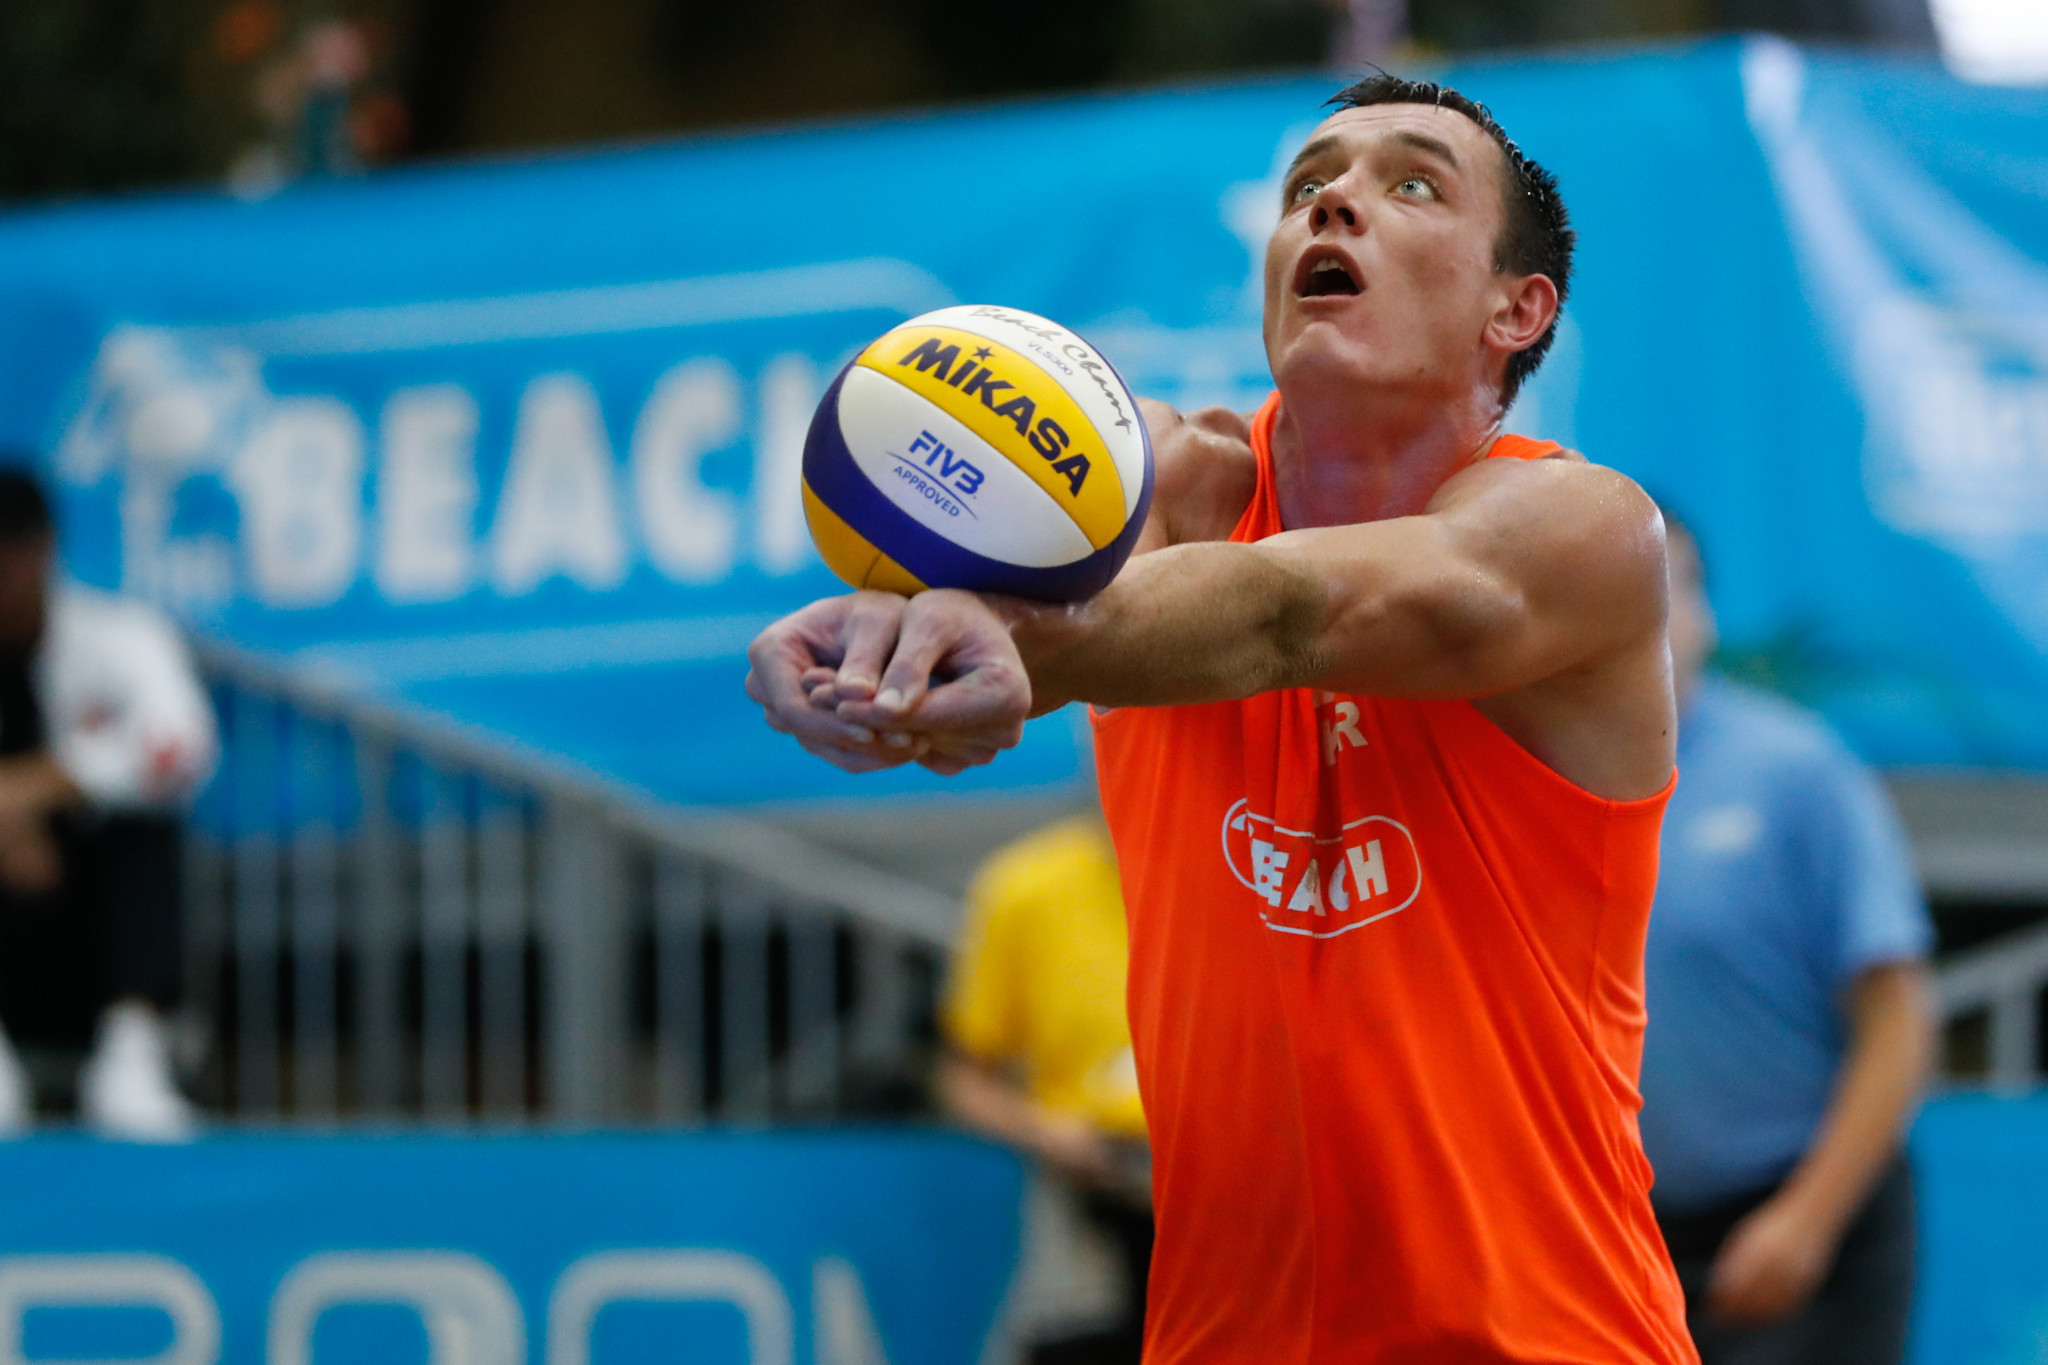 Ukraine's Oleksii Denin, pictured, and Sergiy Popov are one of eight duos that will contest the men's second round ©FIVB
